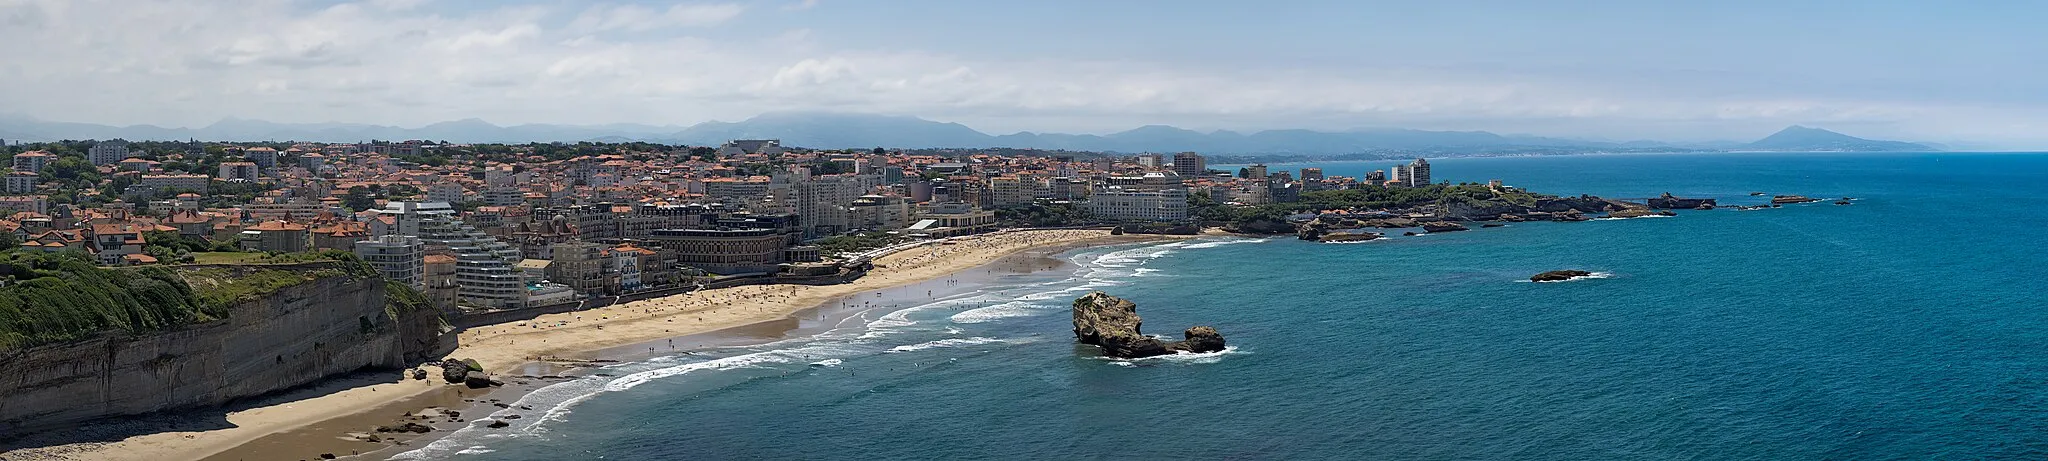 Photo showing: View of Biarritz from the lighthouse